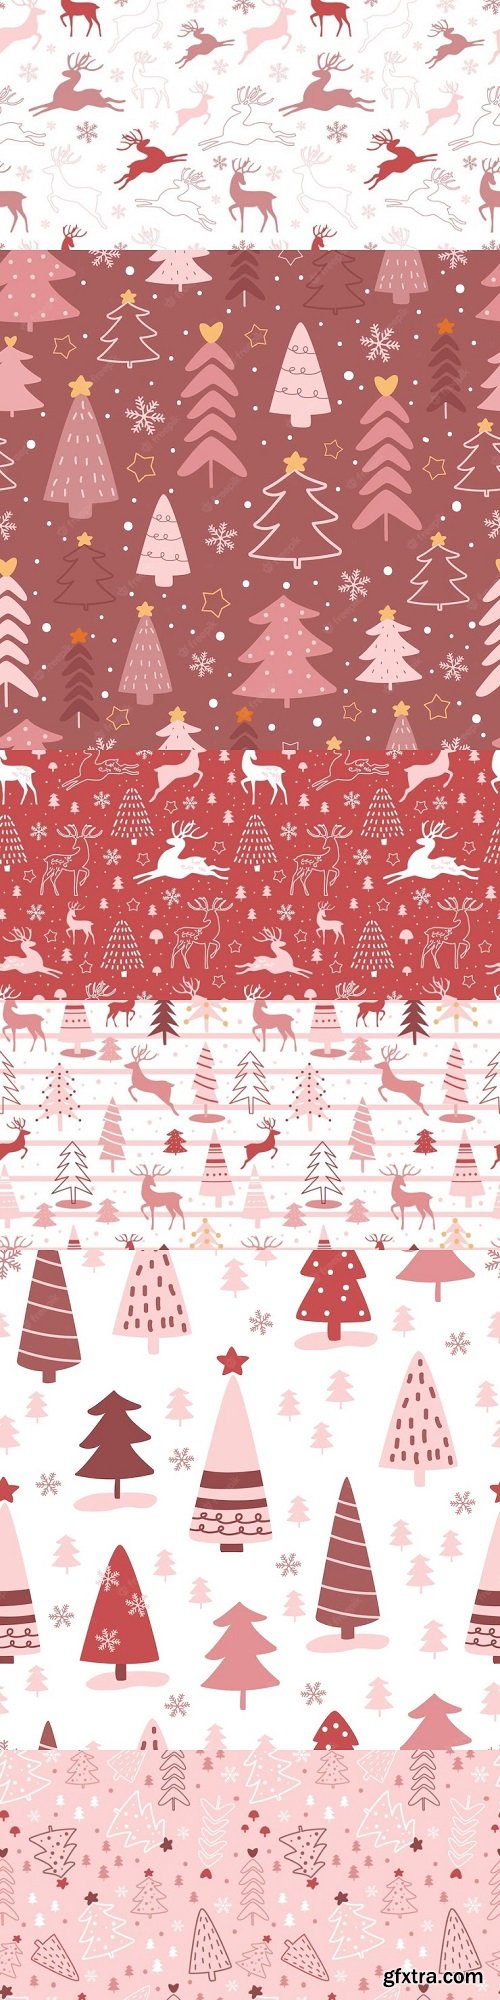 Winter and christmas themed seamless patterns